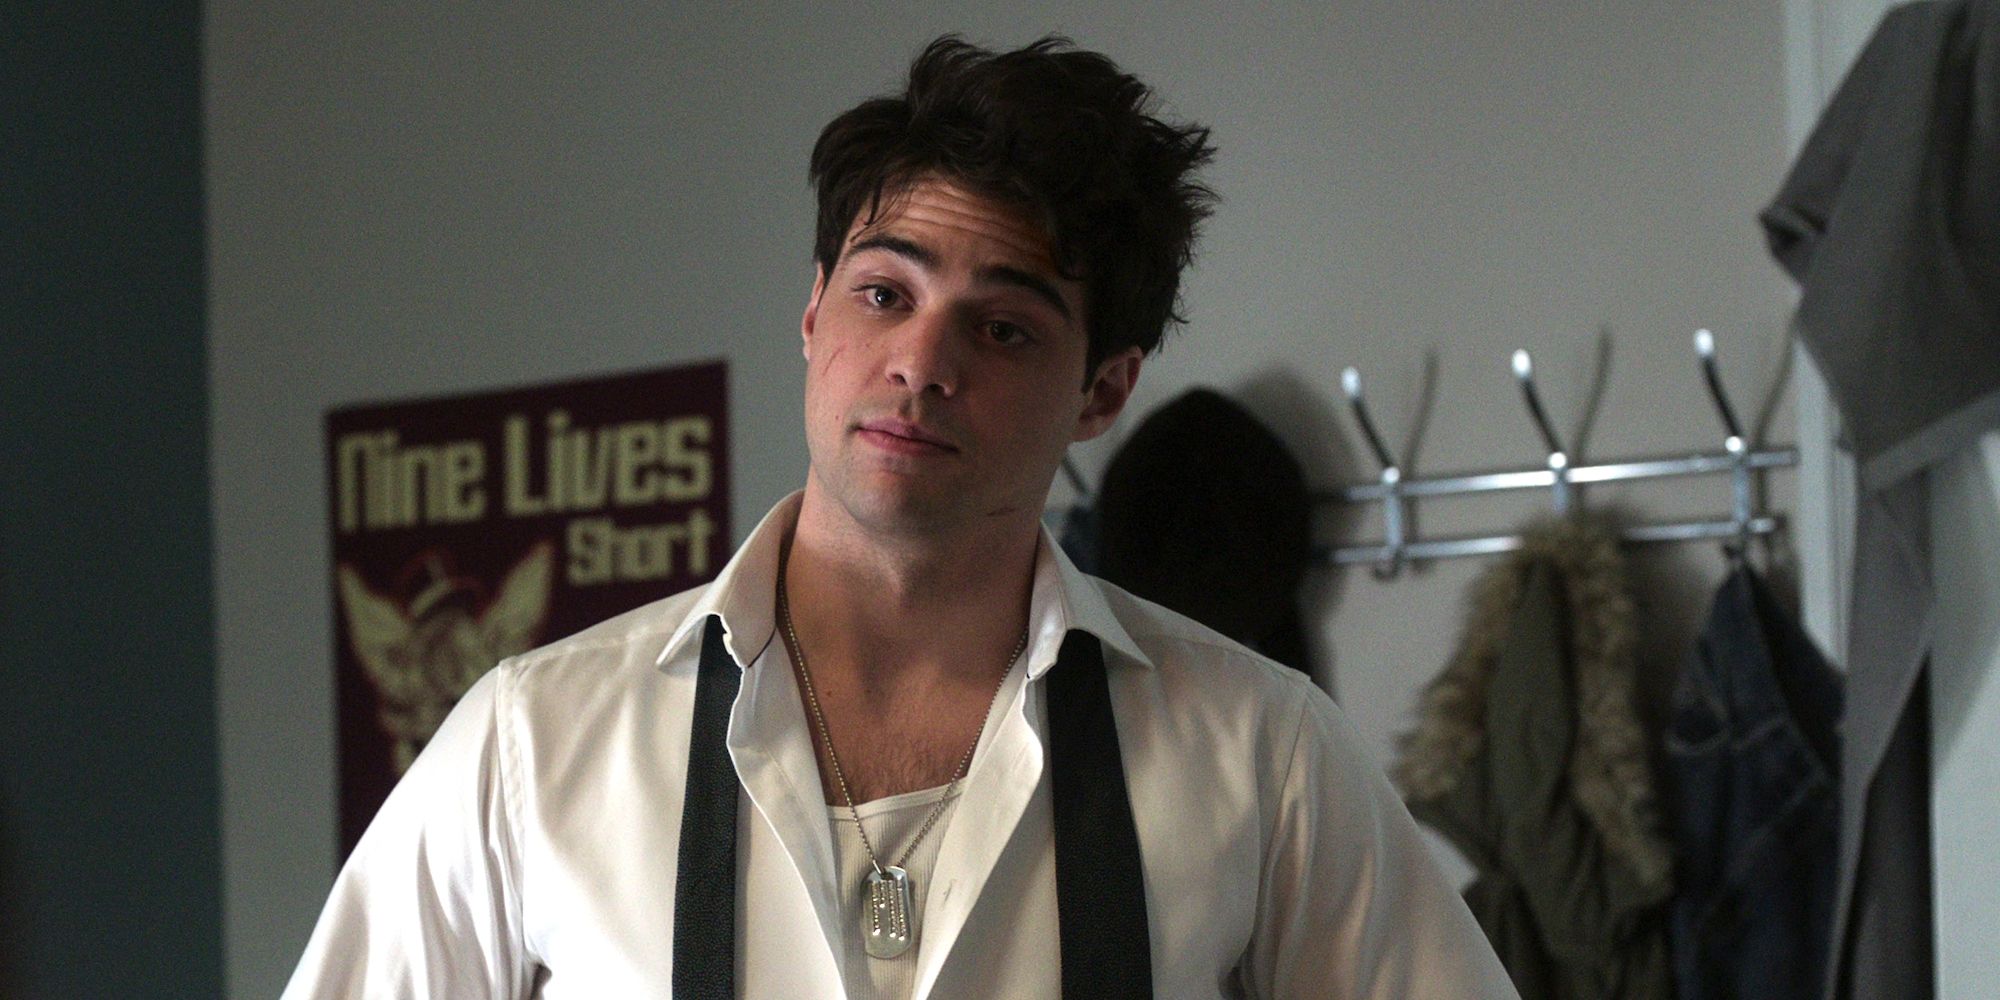 Noah Centineo in The Recruit with undone tie